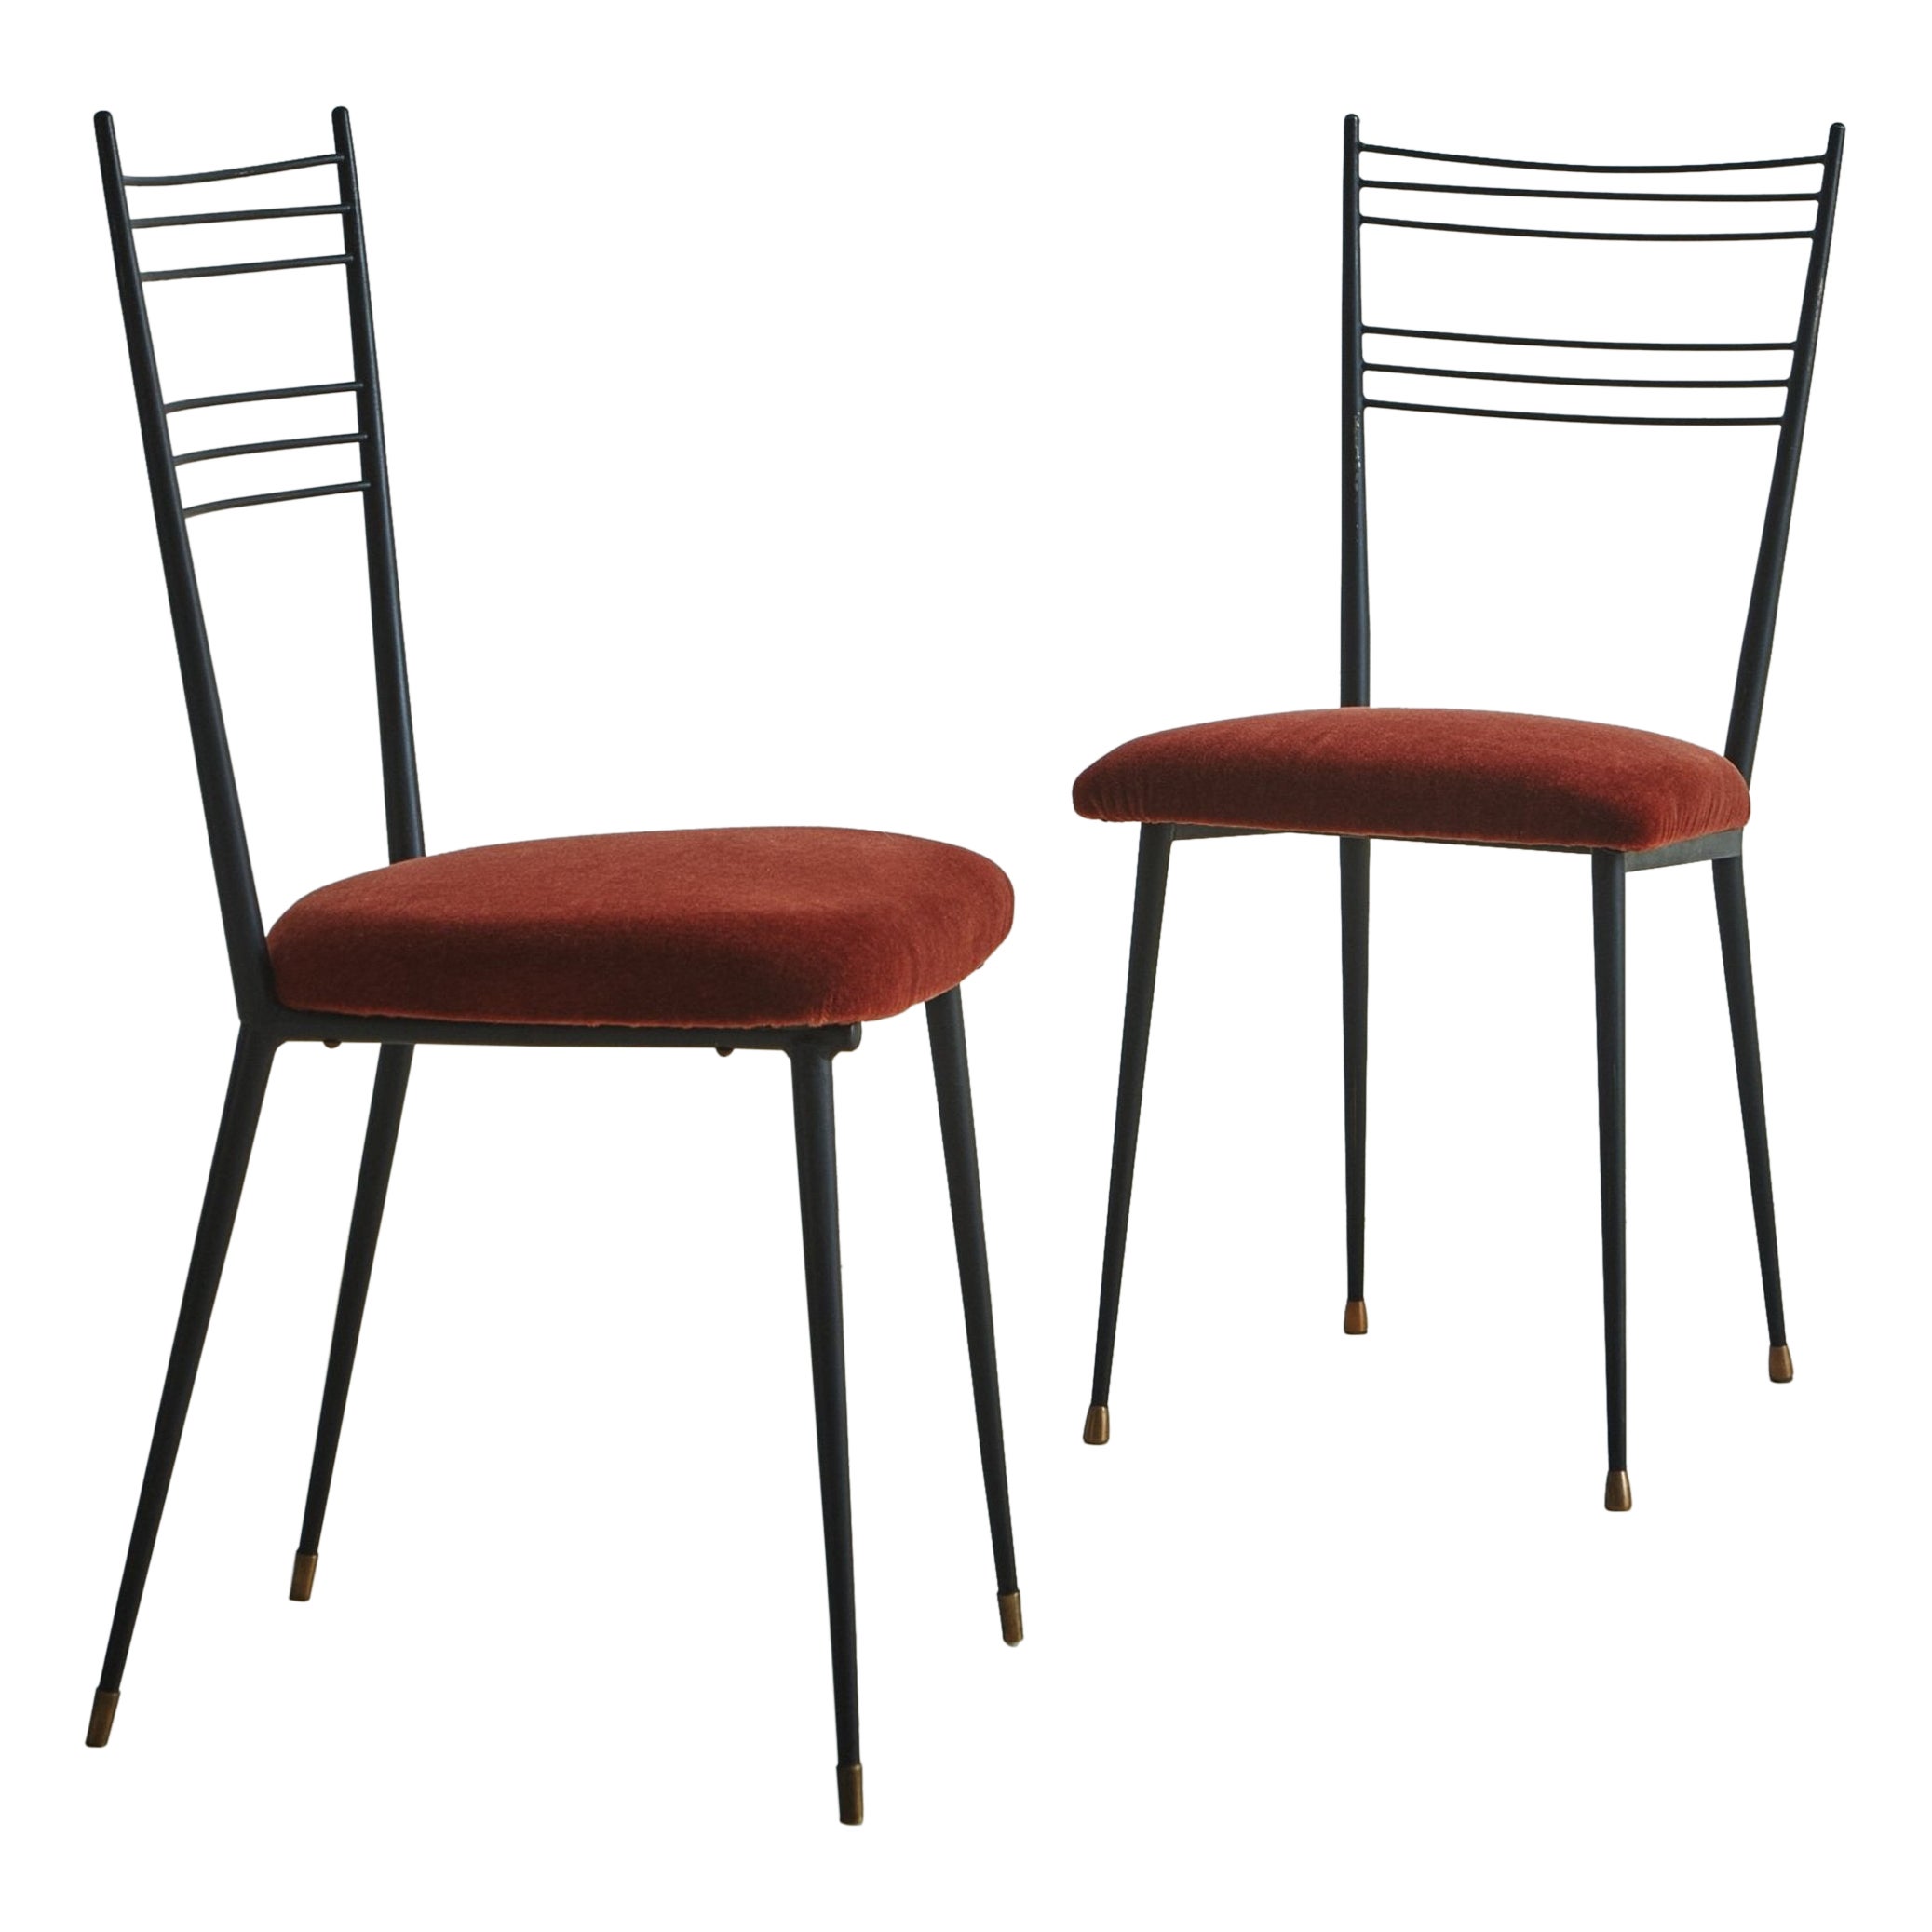 Set of 4 Steel Dining Chairs in Rust Mohair Attributed to Colette Guedon For Sale